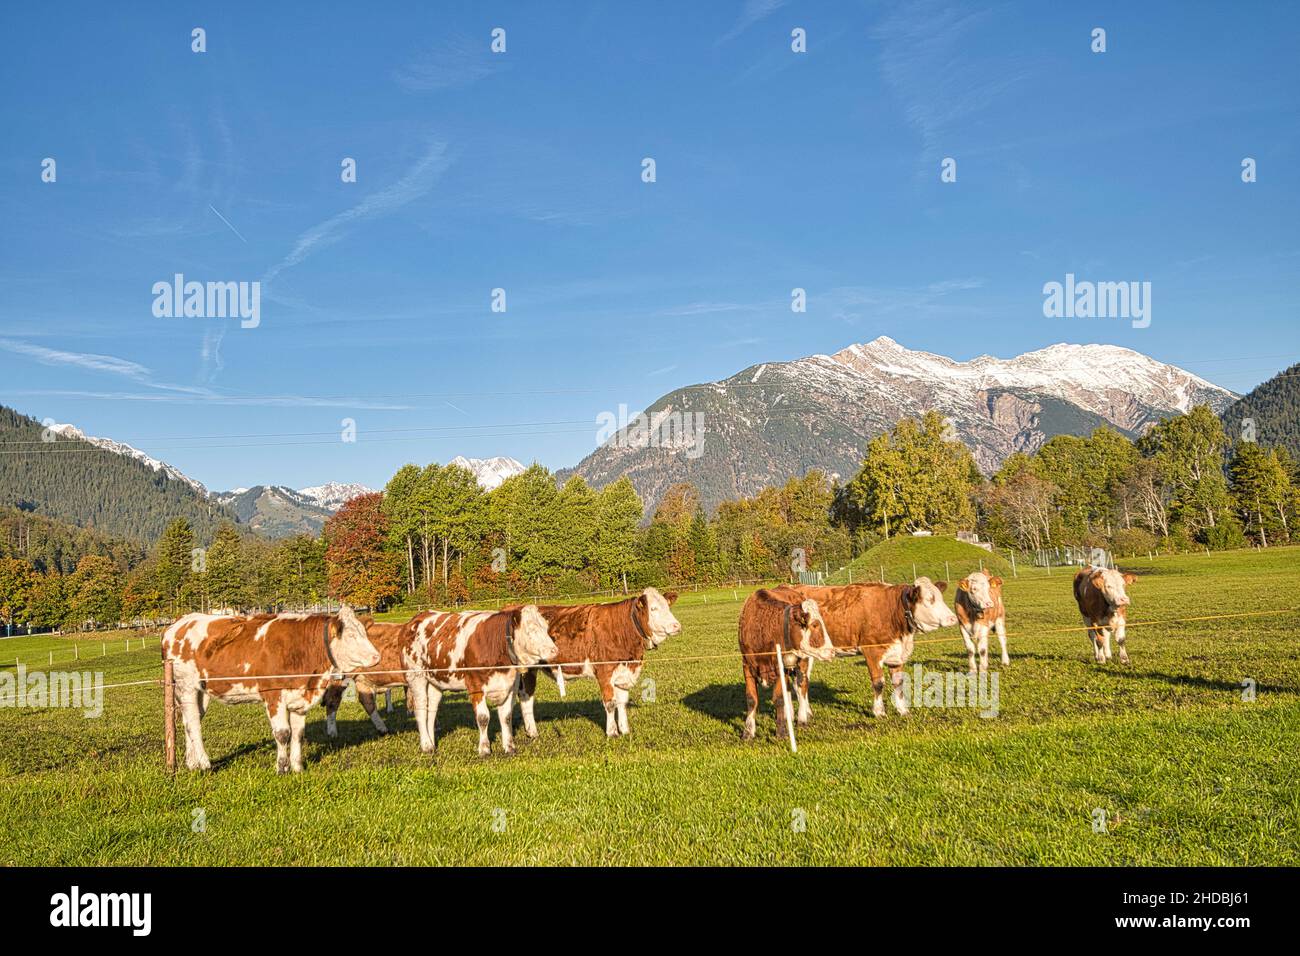 Cattle on pasture in the Alps in Bavaria and Austria Stock Photo